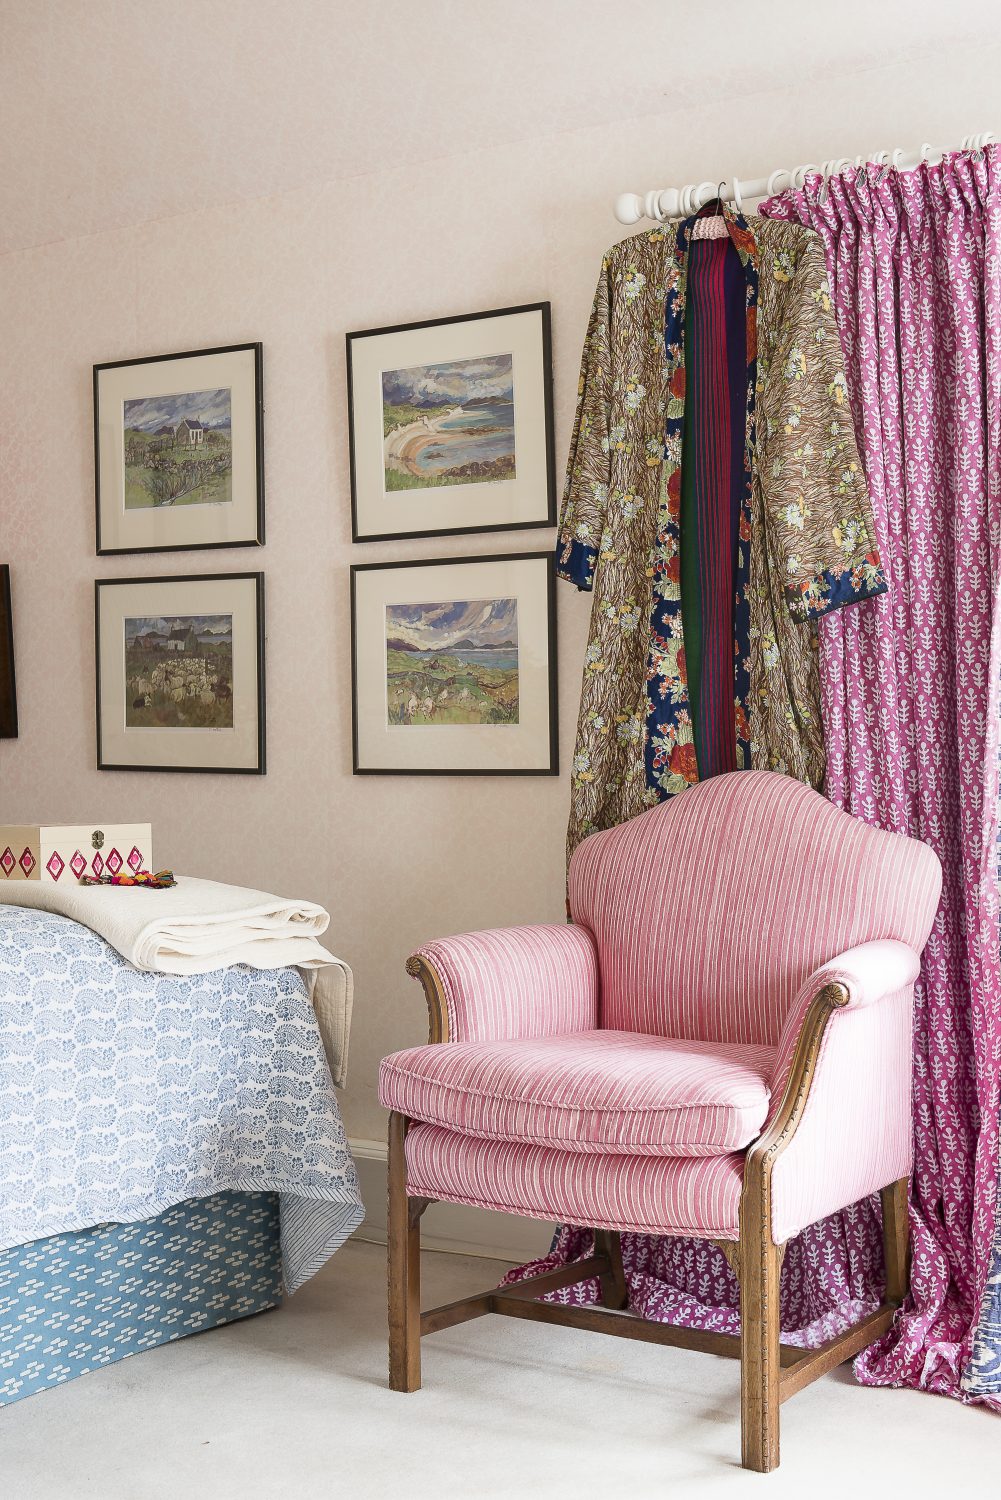 Rollo and Molly’s bedroom. All the fabrics and the quilt are by Molly Mahon